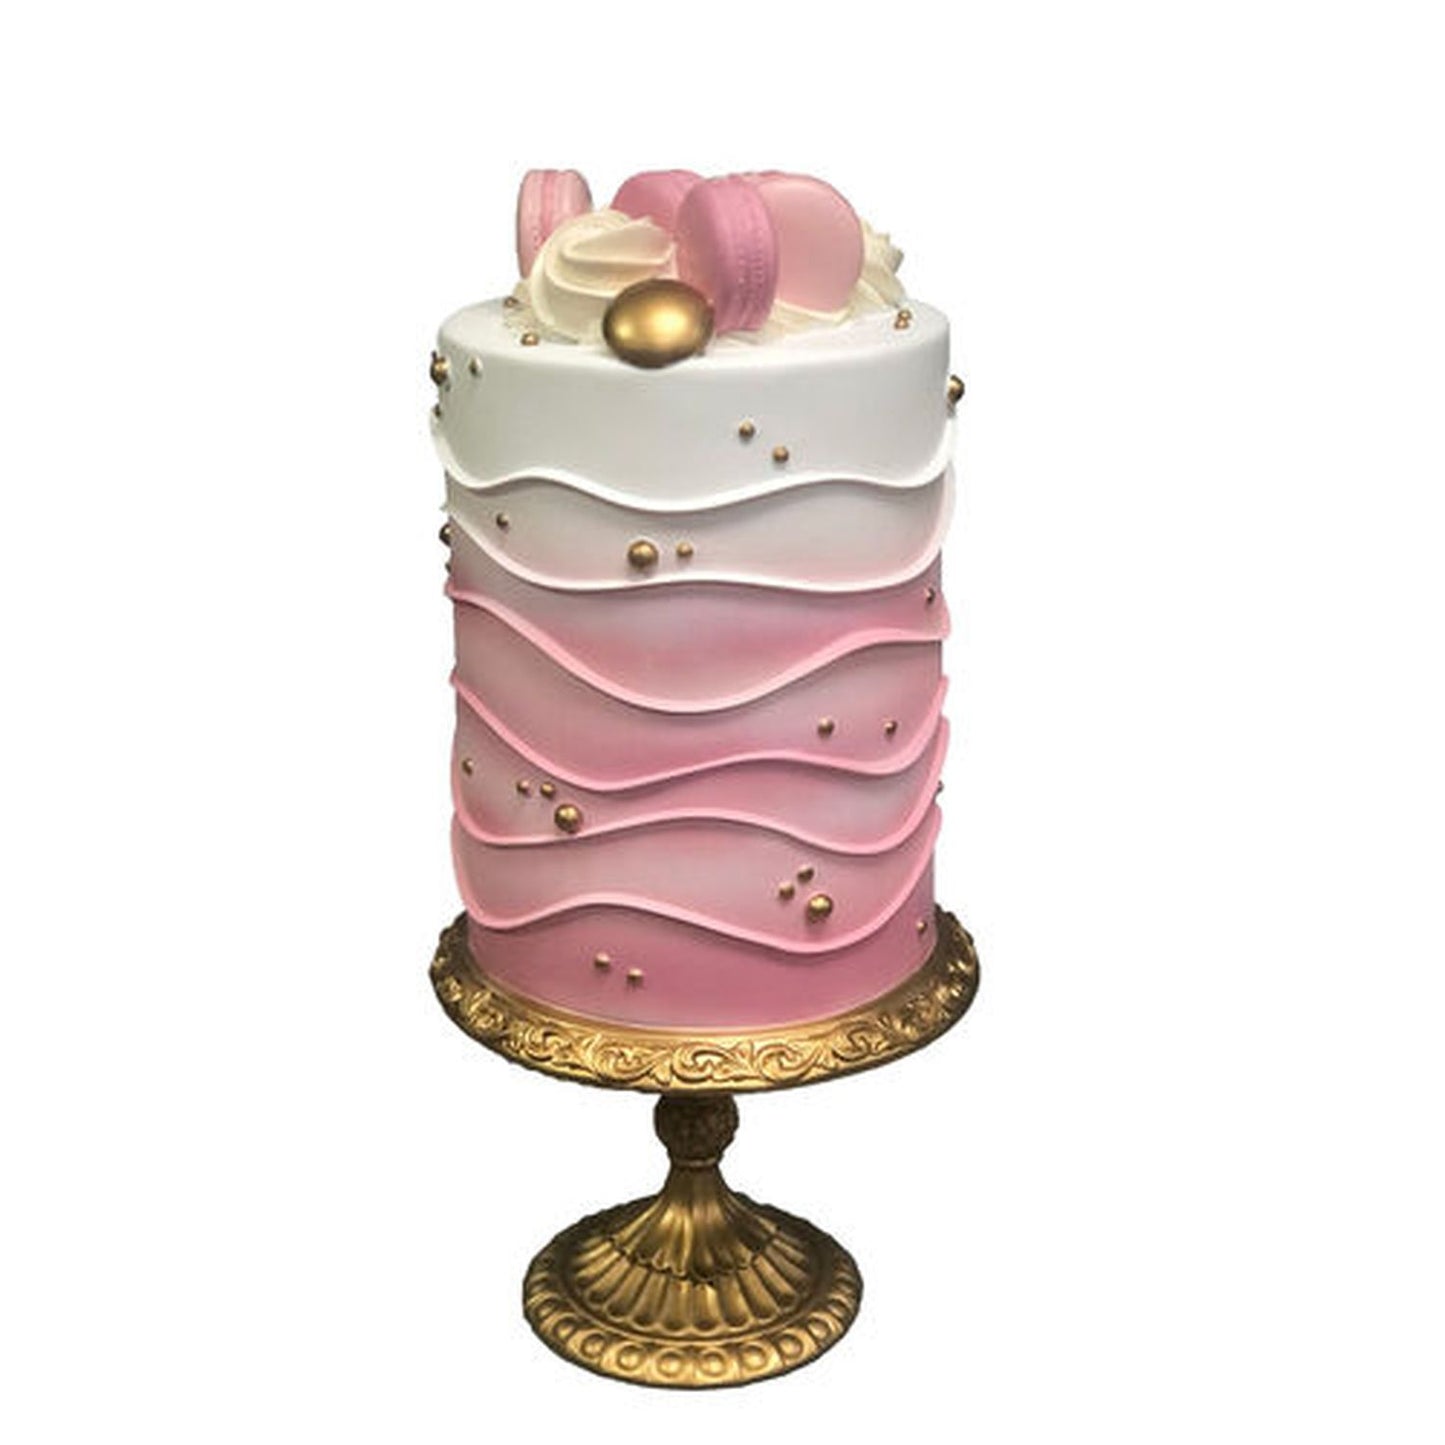 December Diamonds Spring Confections 20" Pink Cake With Macaron On Gold Pedestal